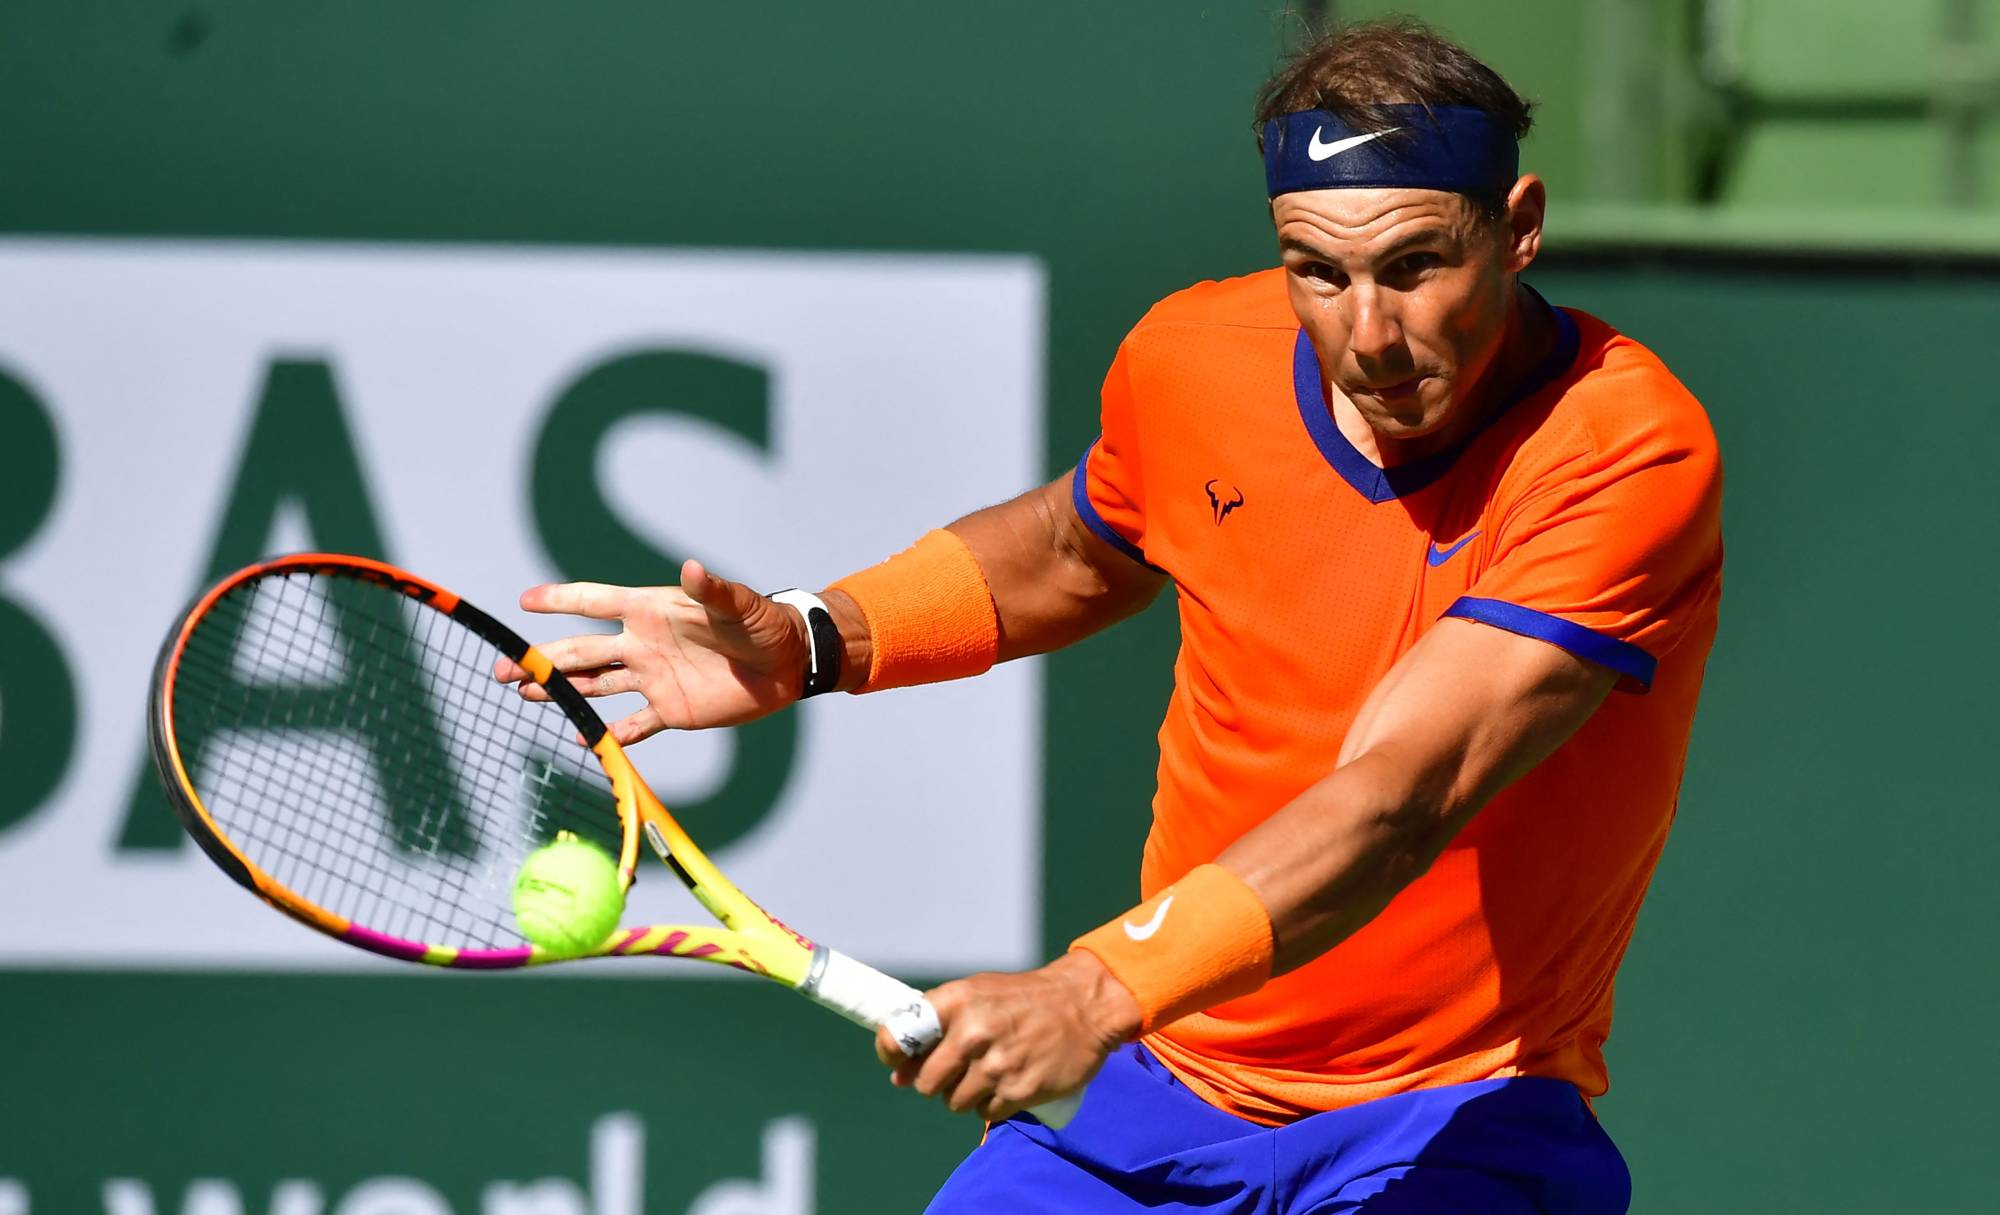 Rafael Nadal outlasts Nick Kyrgios in thriller to advance at Indian Wells